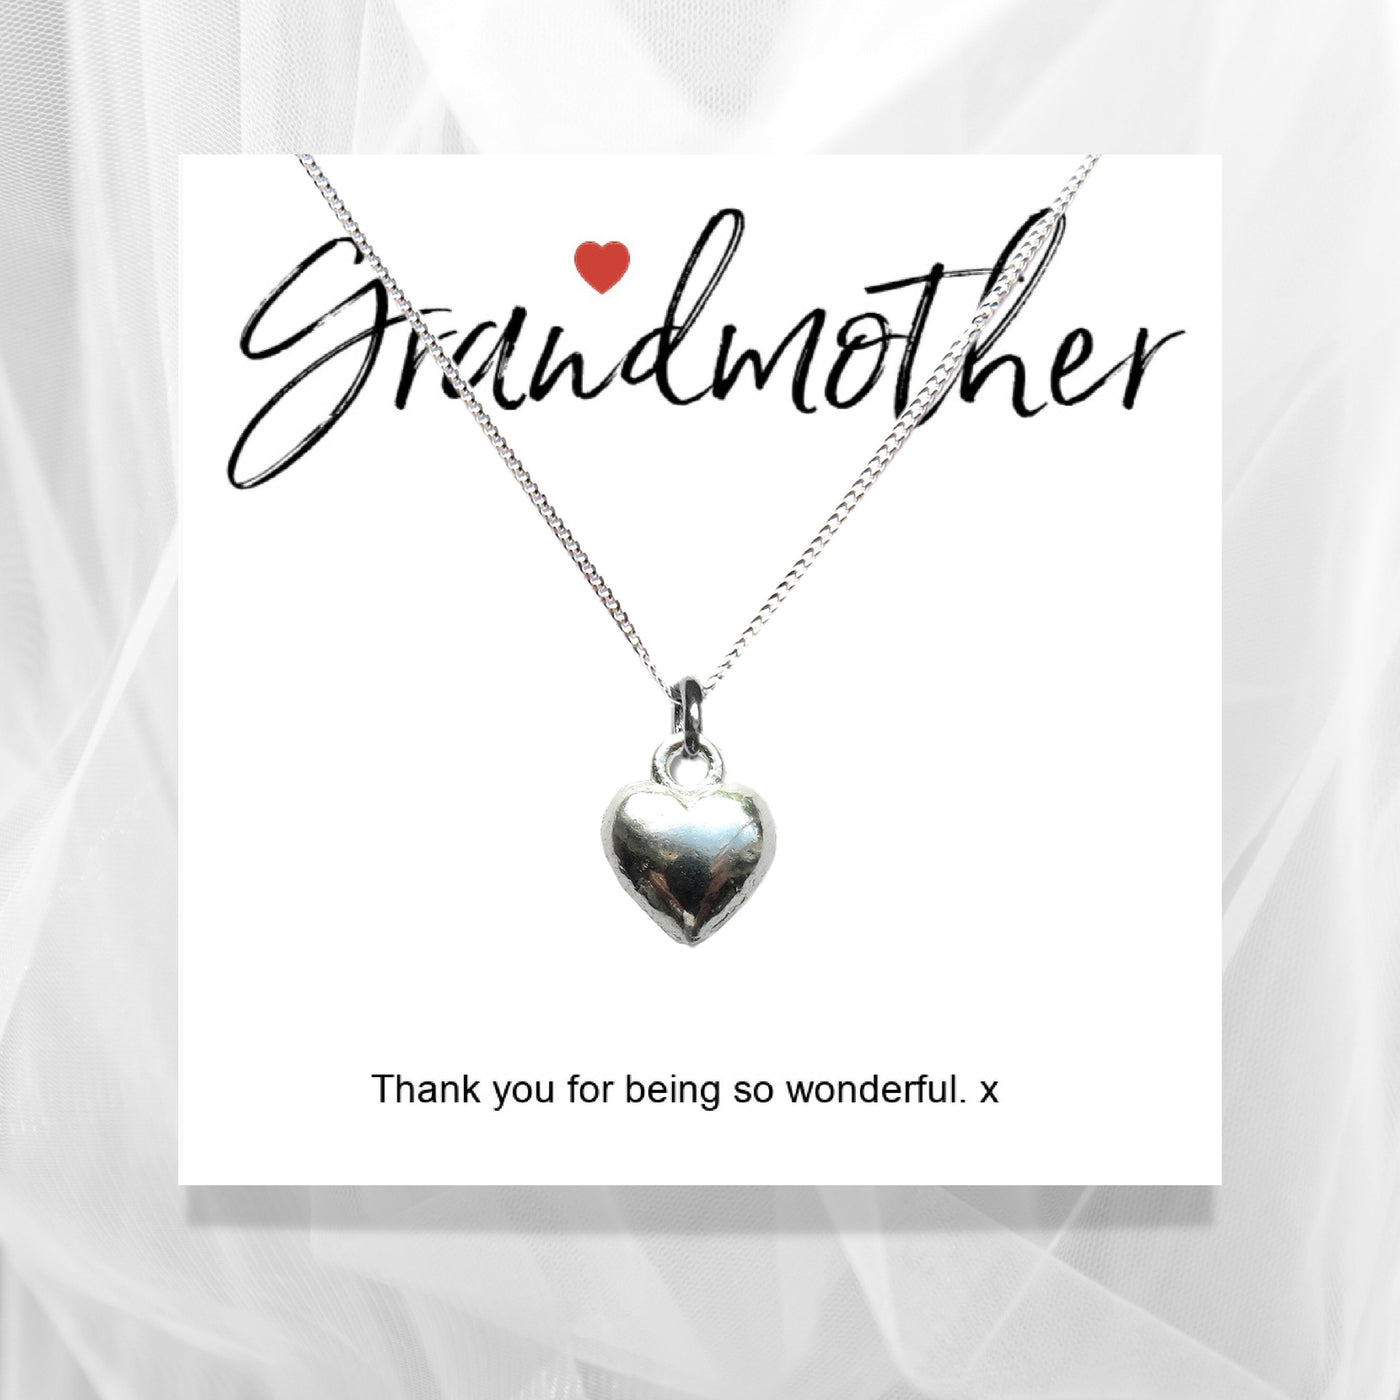 Grandmother Little Quote Gift Card with Heart Necklace